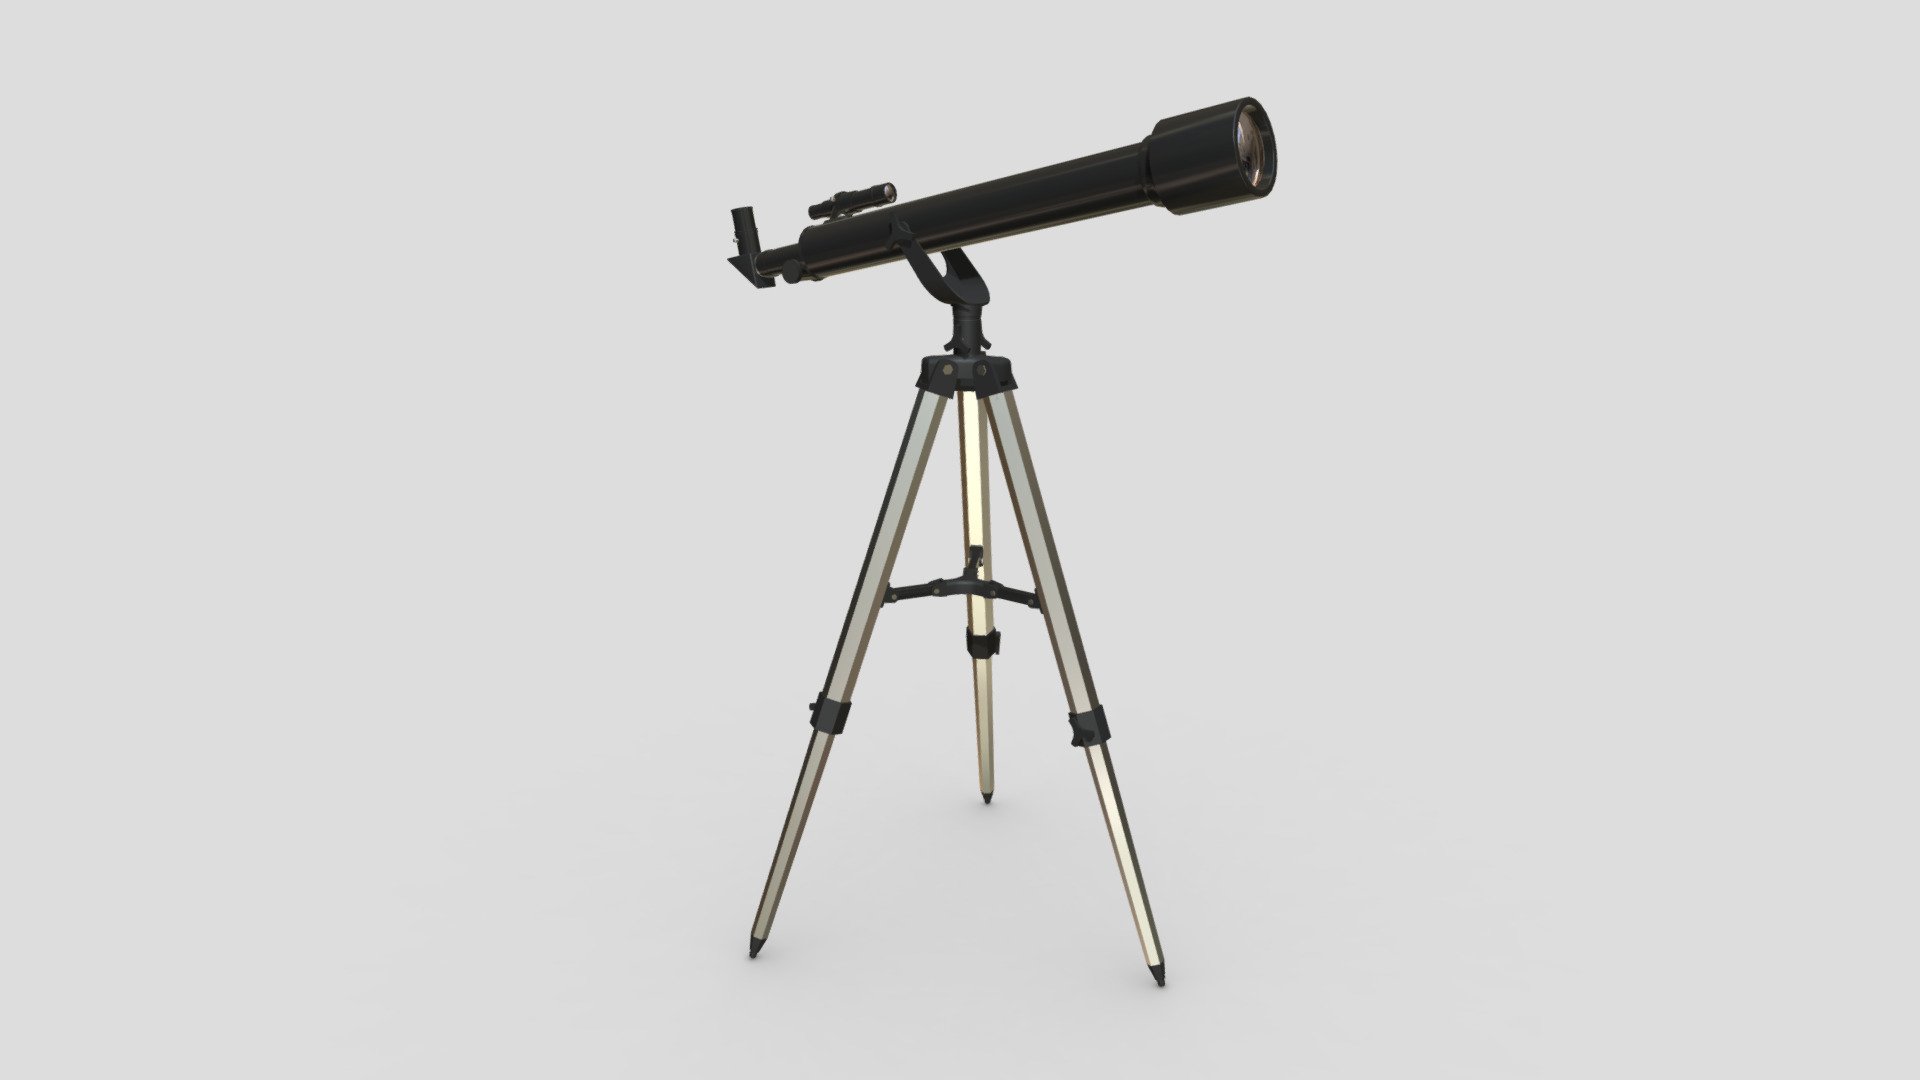 low poly 3d model of telescope set on the tripod stand - Telescope with the tripod - Buy Royalty Free 3D model by assetfactory 3d model